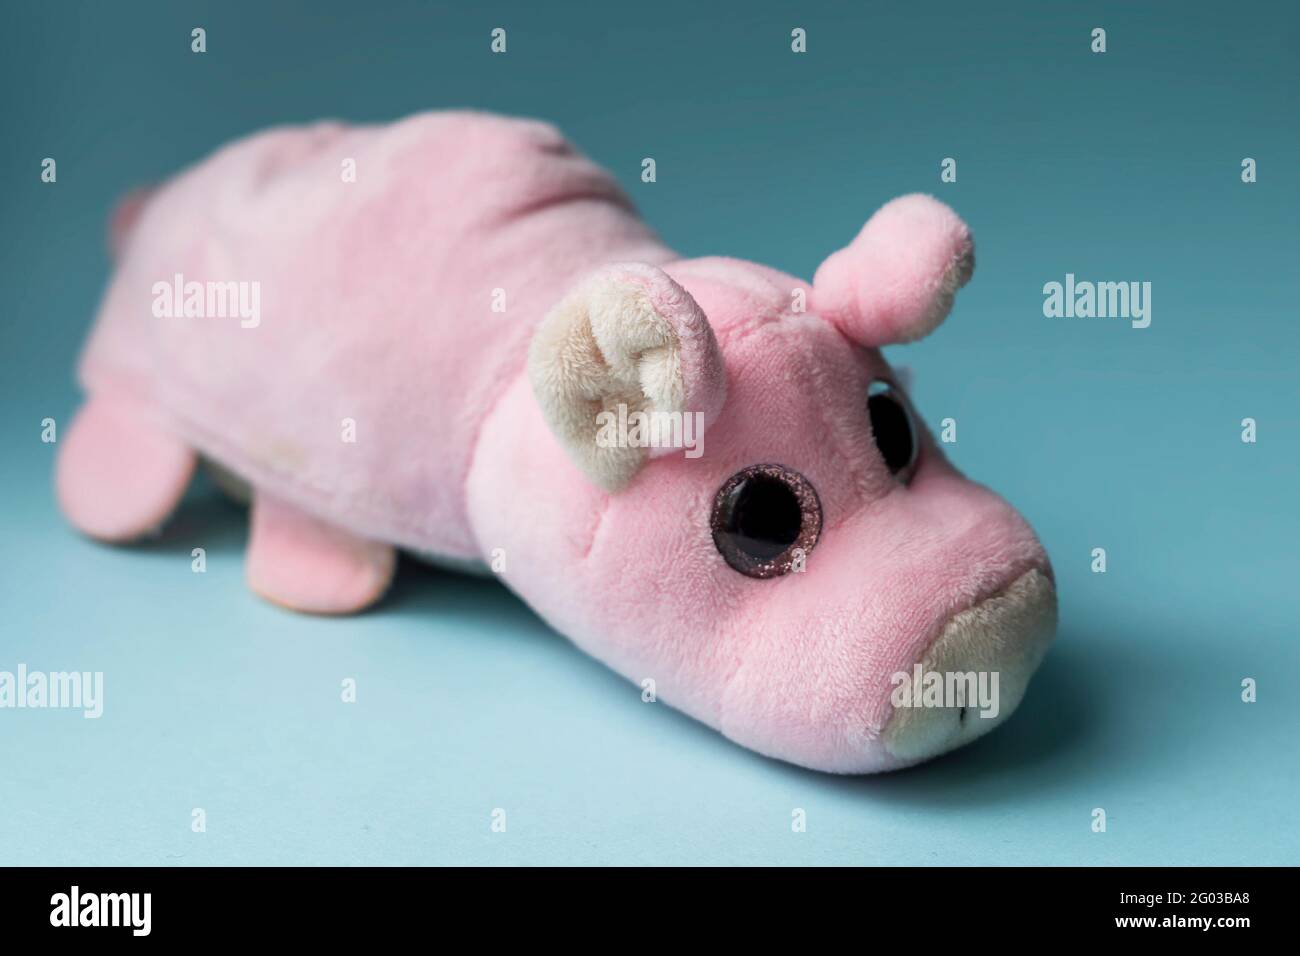 Plush toy pink pig on a blue background. Indoors, day light Front view. Stock Photo